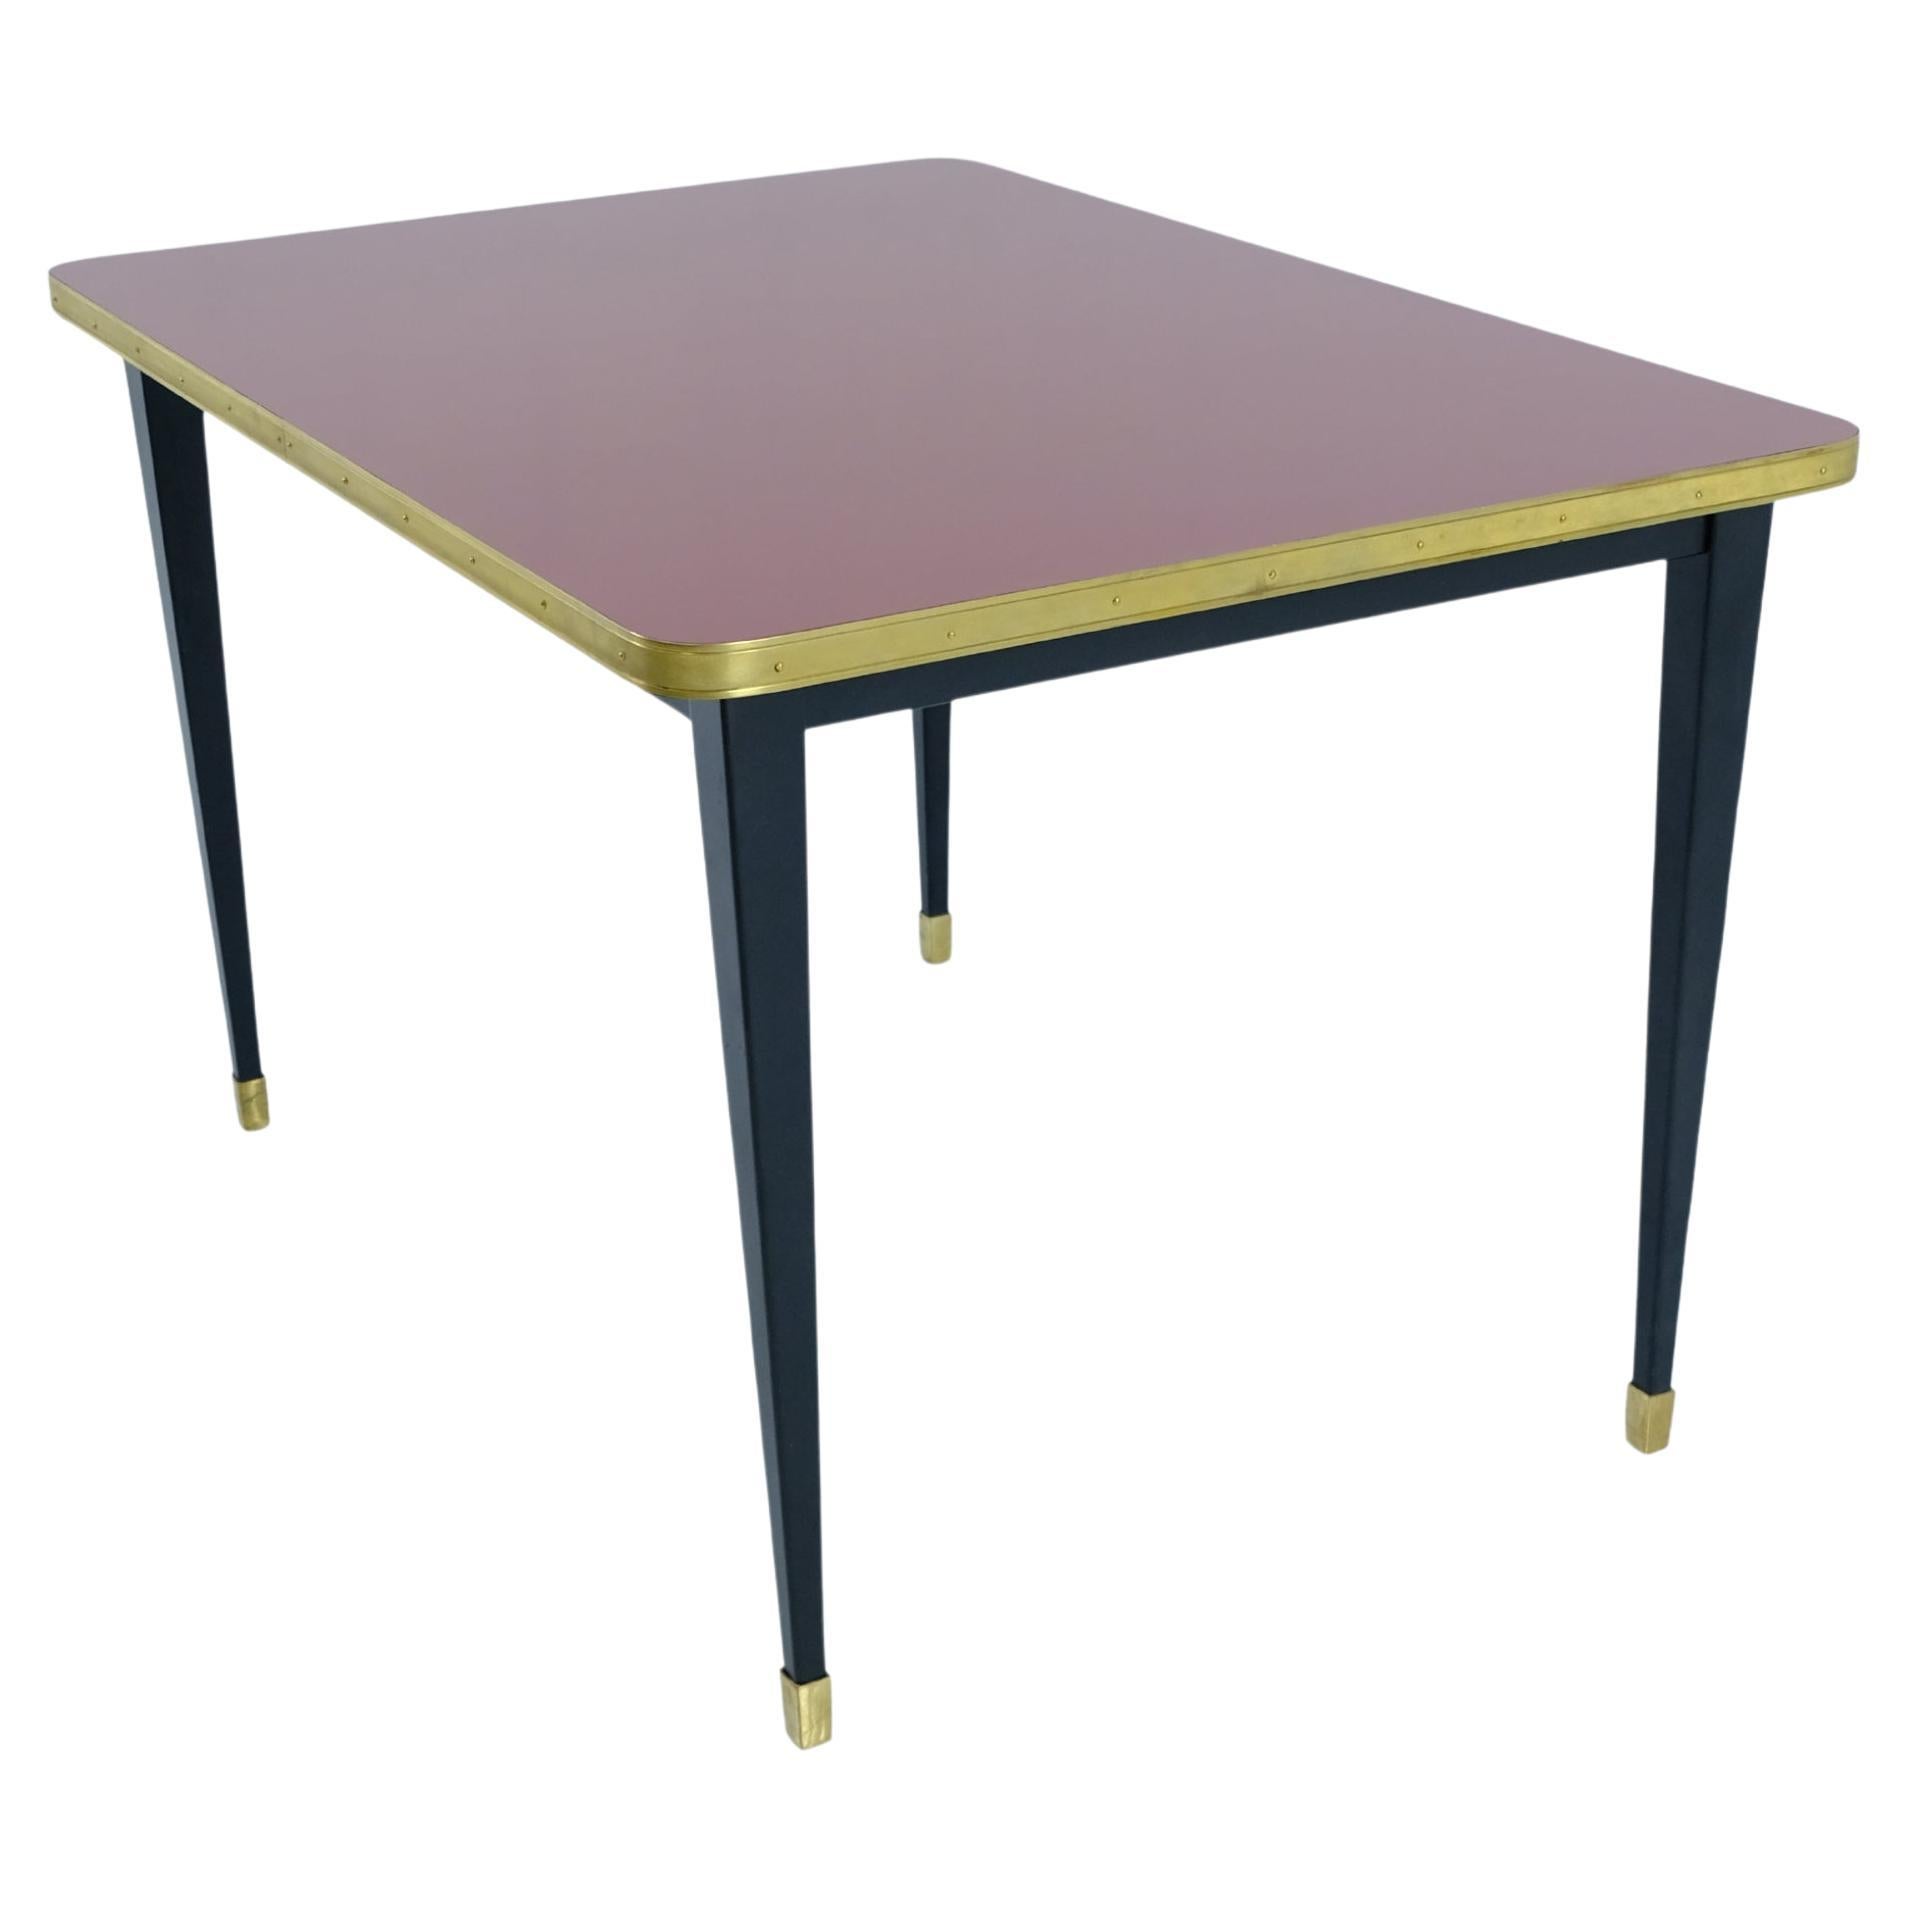 Dinning Table, High Gloss Laminate, Brass, Conic Legs, Burgundy- M For Sale